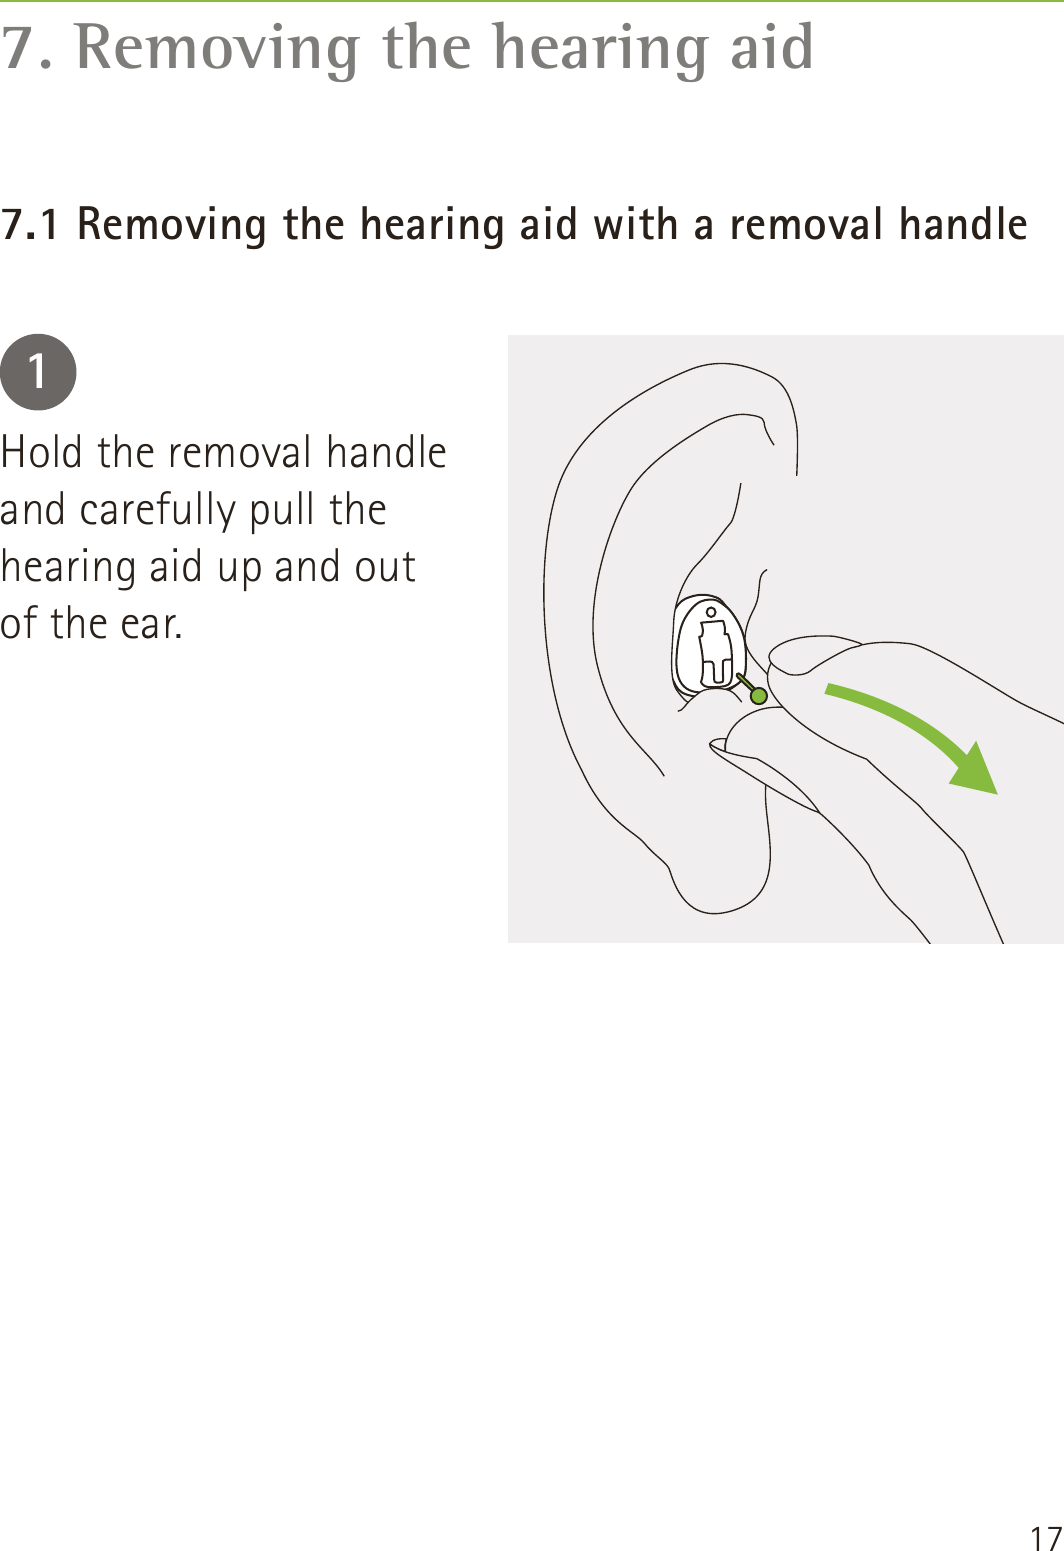 177. Removing the hearing aid7.1 Removing the hearing aid with a removal handle1Hold the removal handle and carefully pull the hearing aid up and out of the ear.